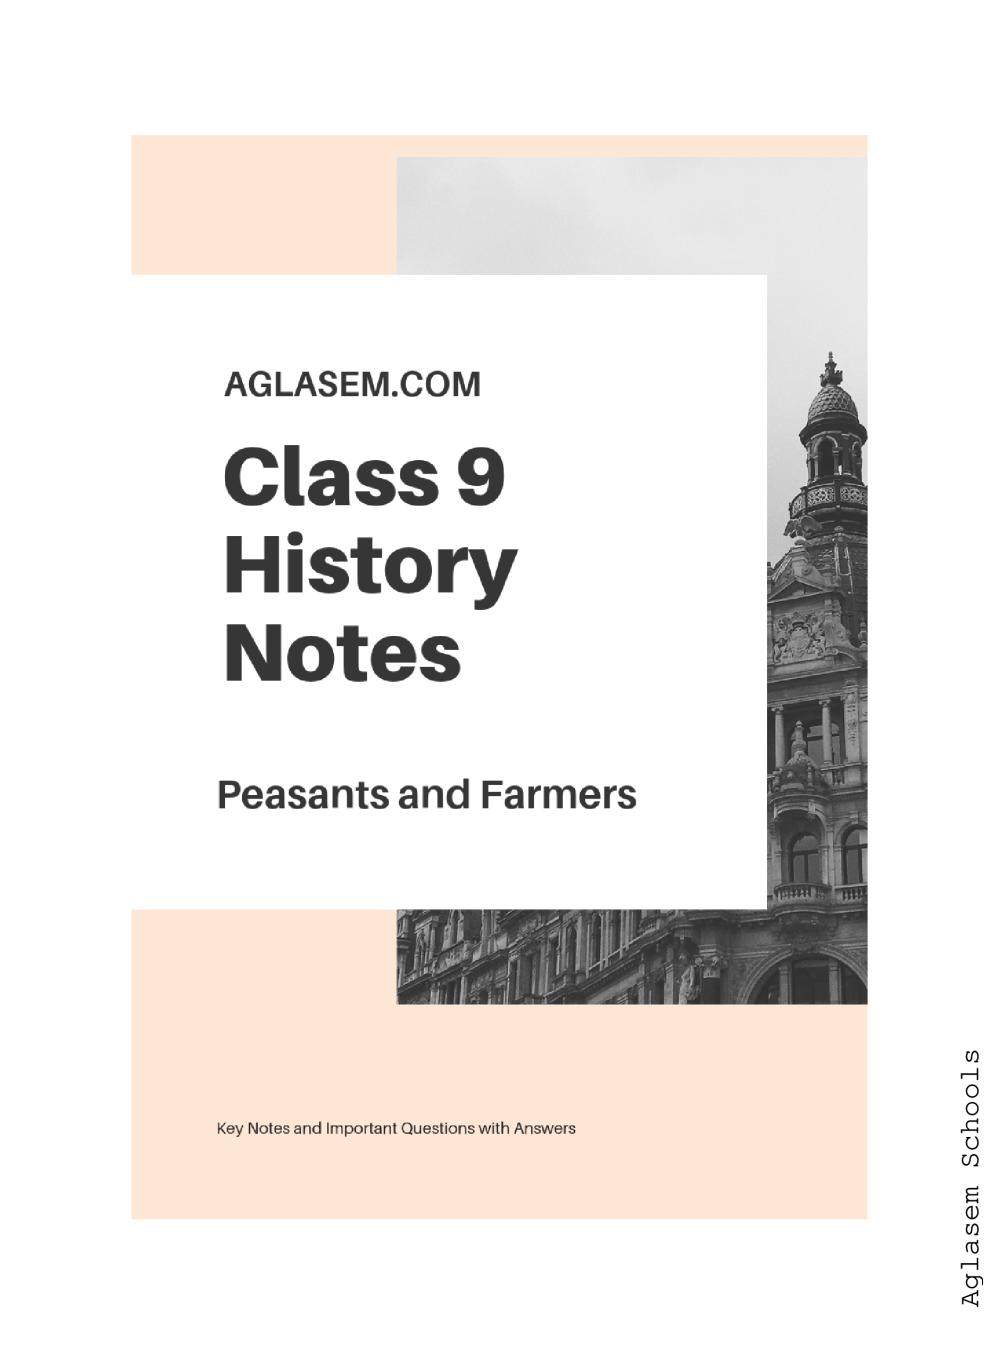 Class 9 Social Science History Notes for Peasants and Farmers - Page 1